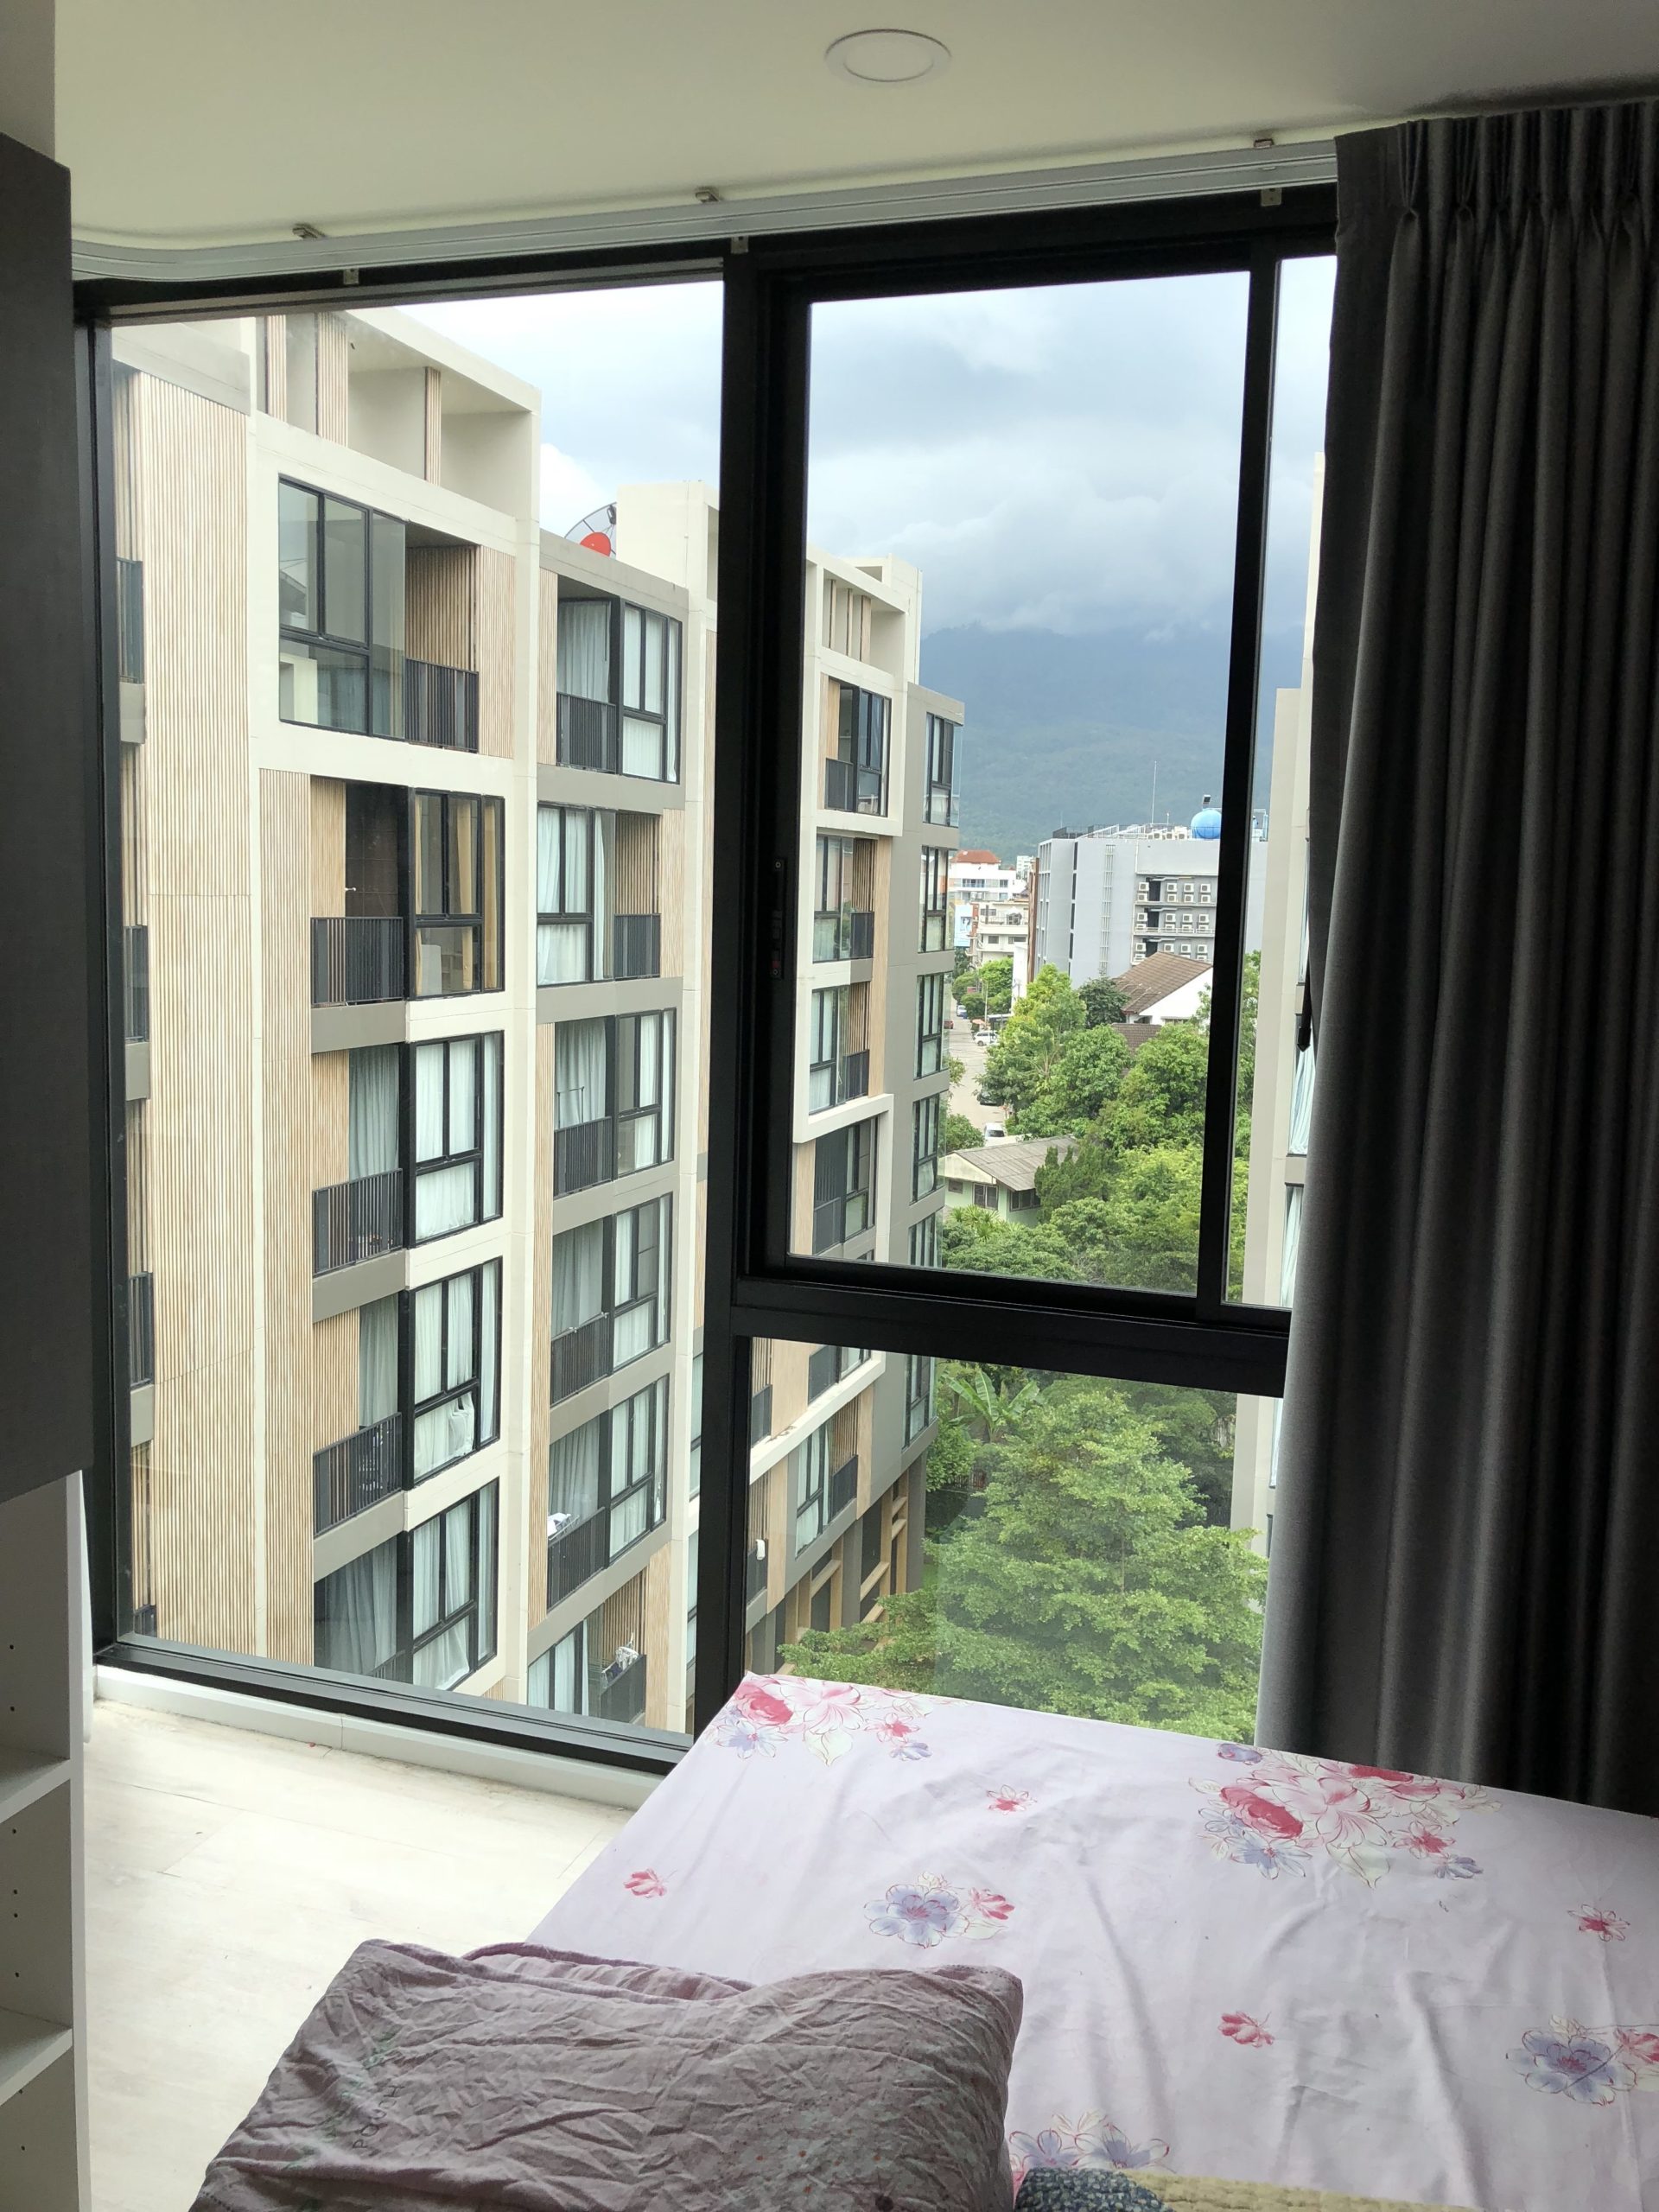 It's easy for Chiang mai digital nomads to find an apartment